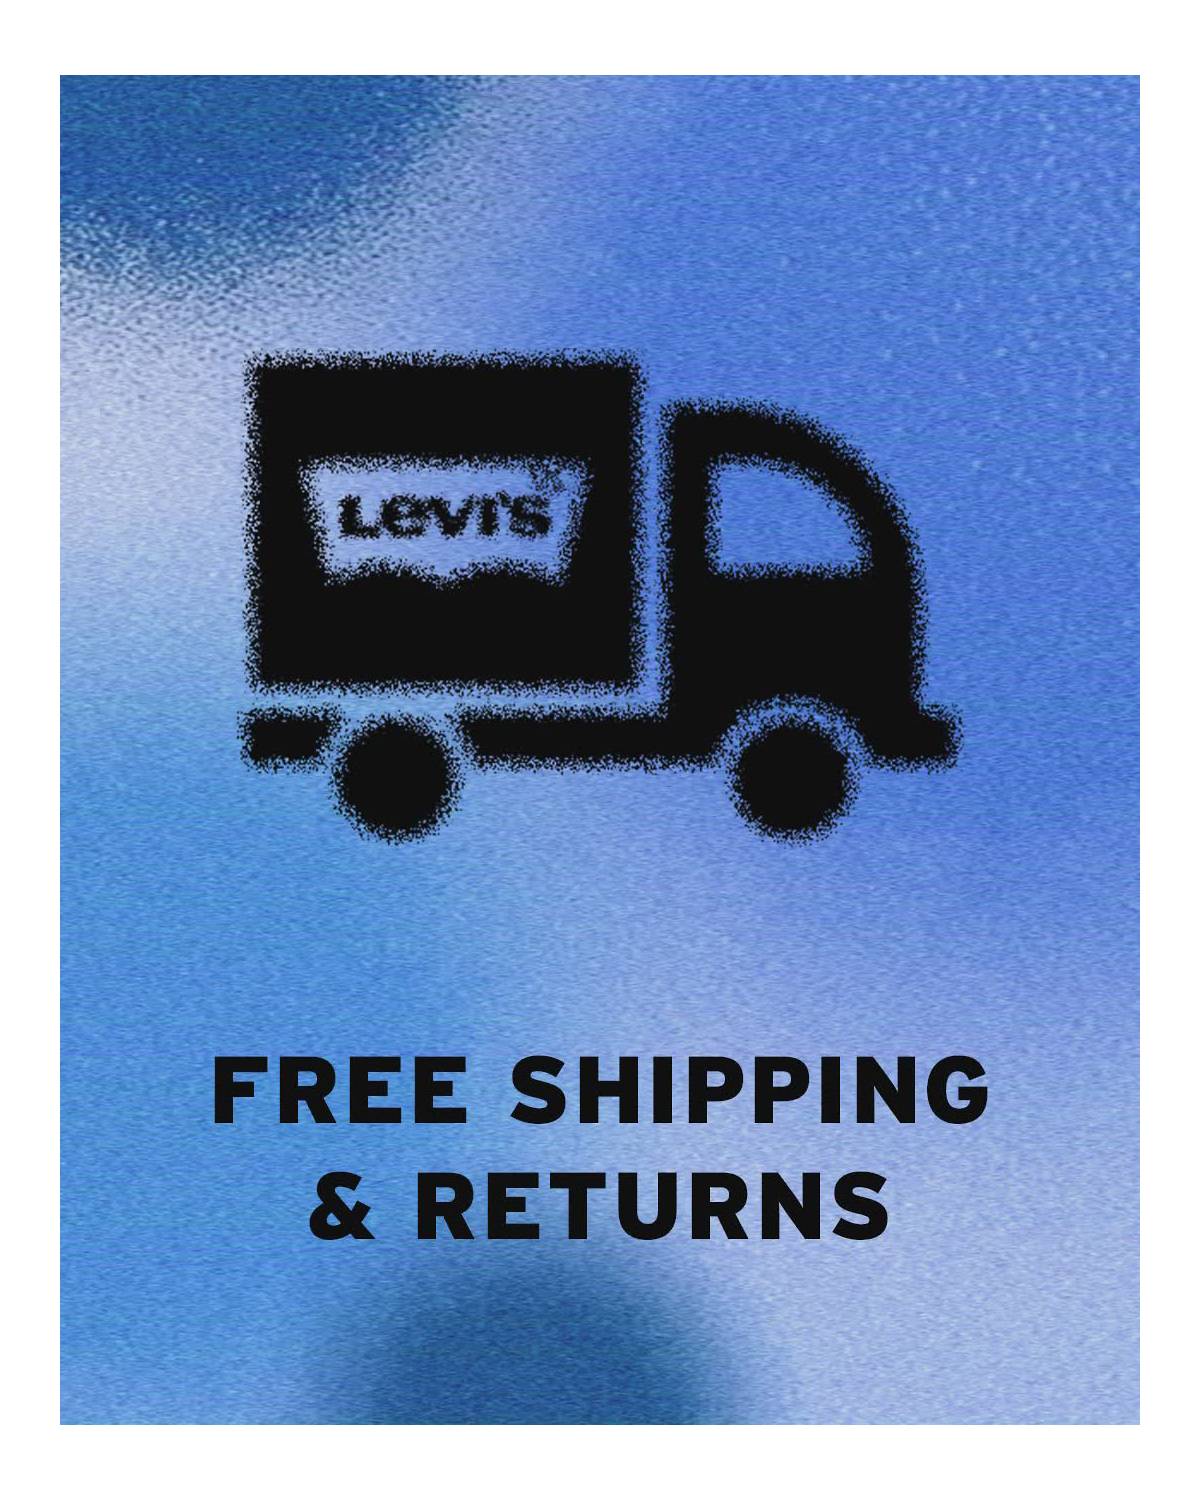 Icon of Truck with Levi's on it and the words "Free Shipping & Returns" overlayed on top of a blue background.